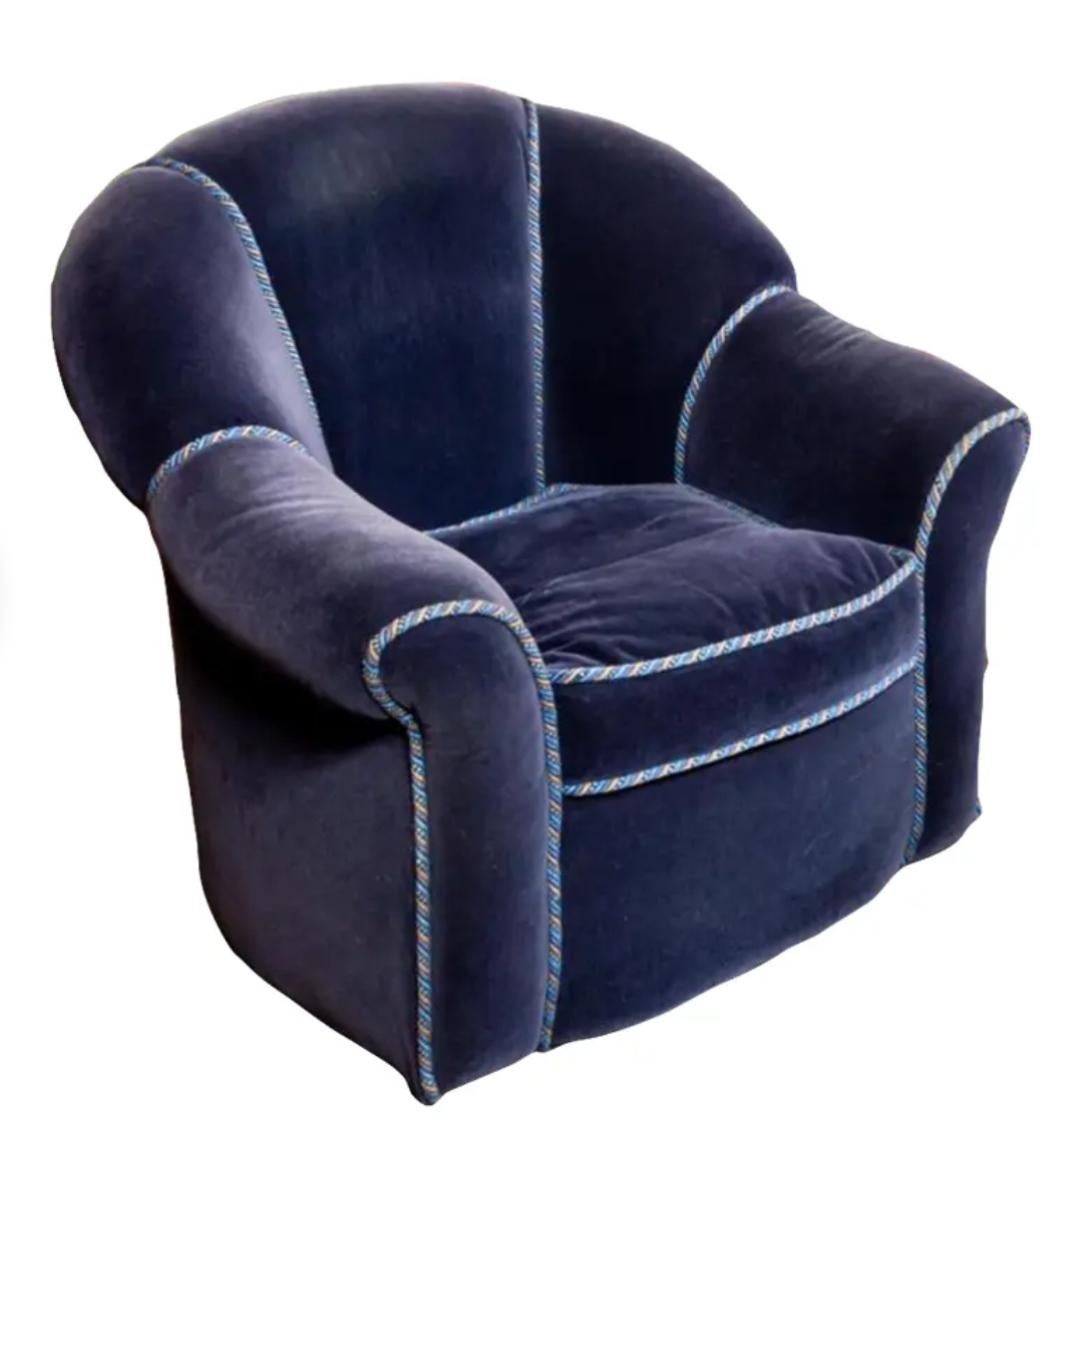 American Art Deco Style Fully Upholstered Sapphire Blue Mohair Club Chair